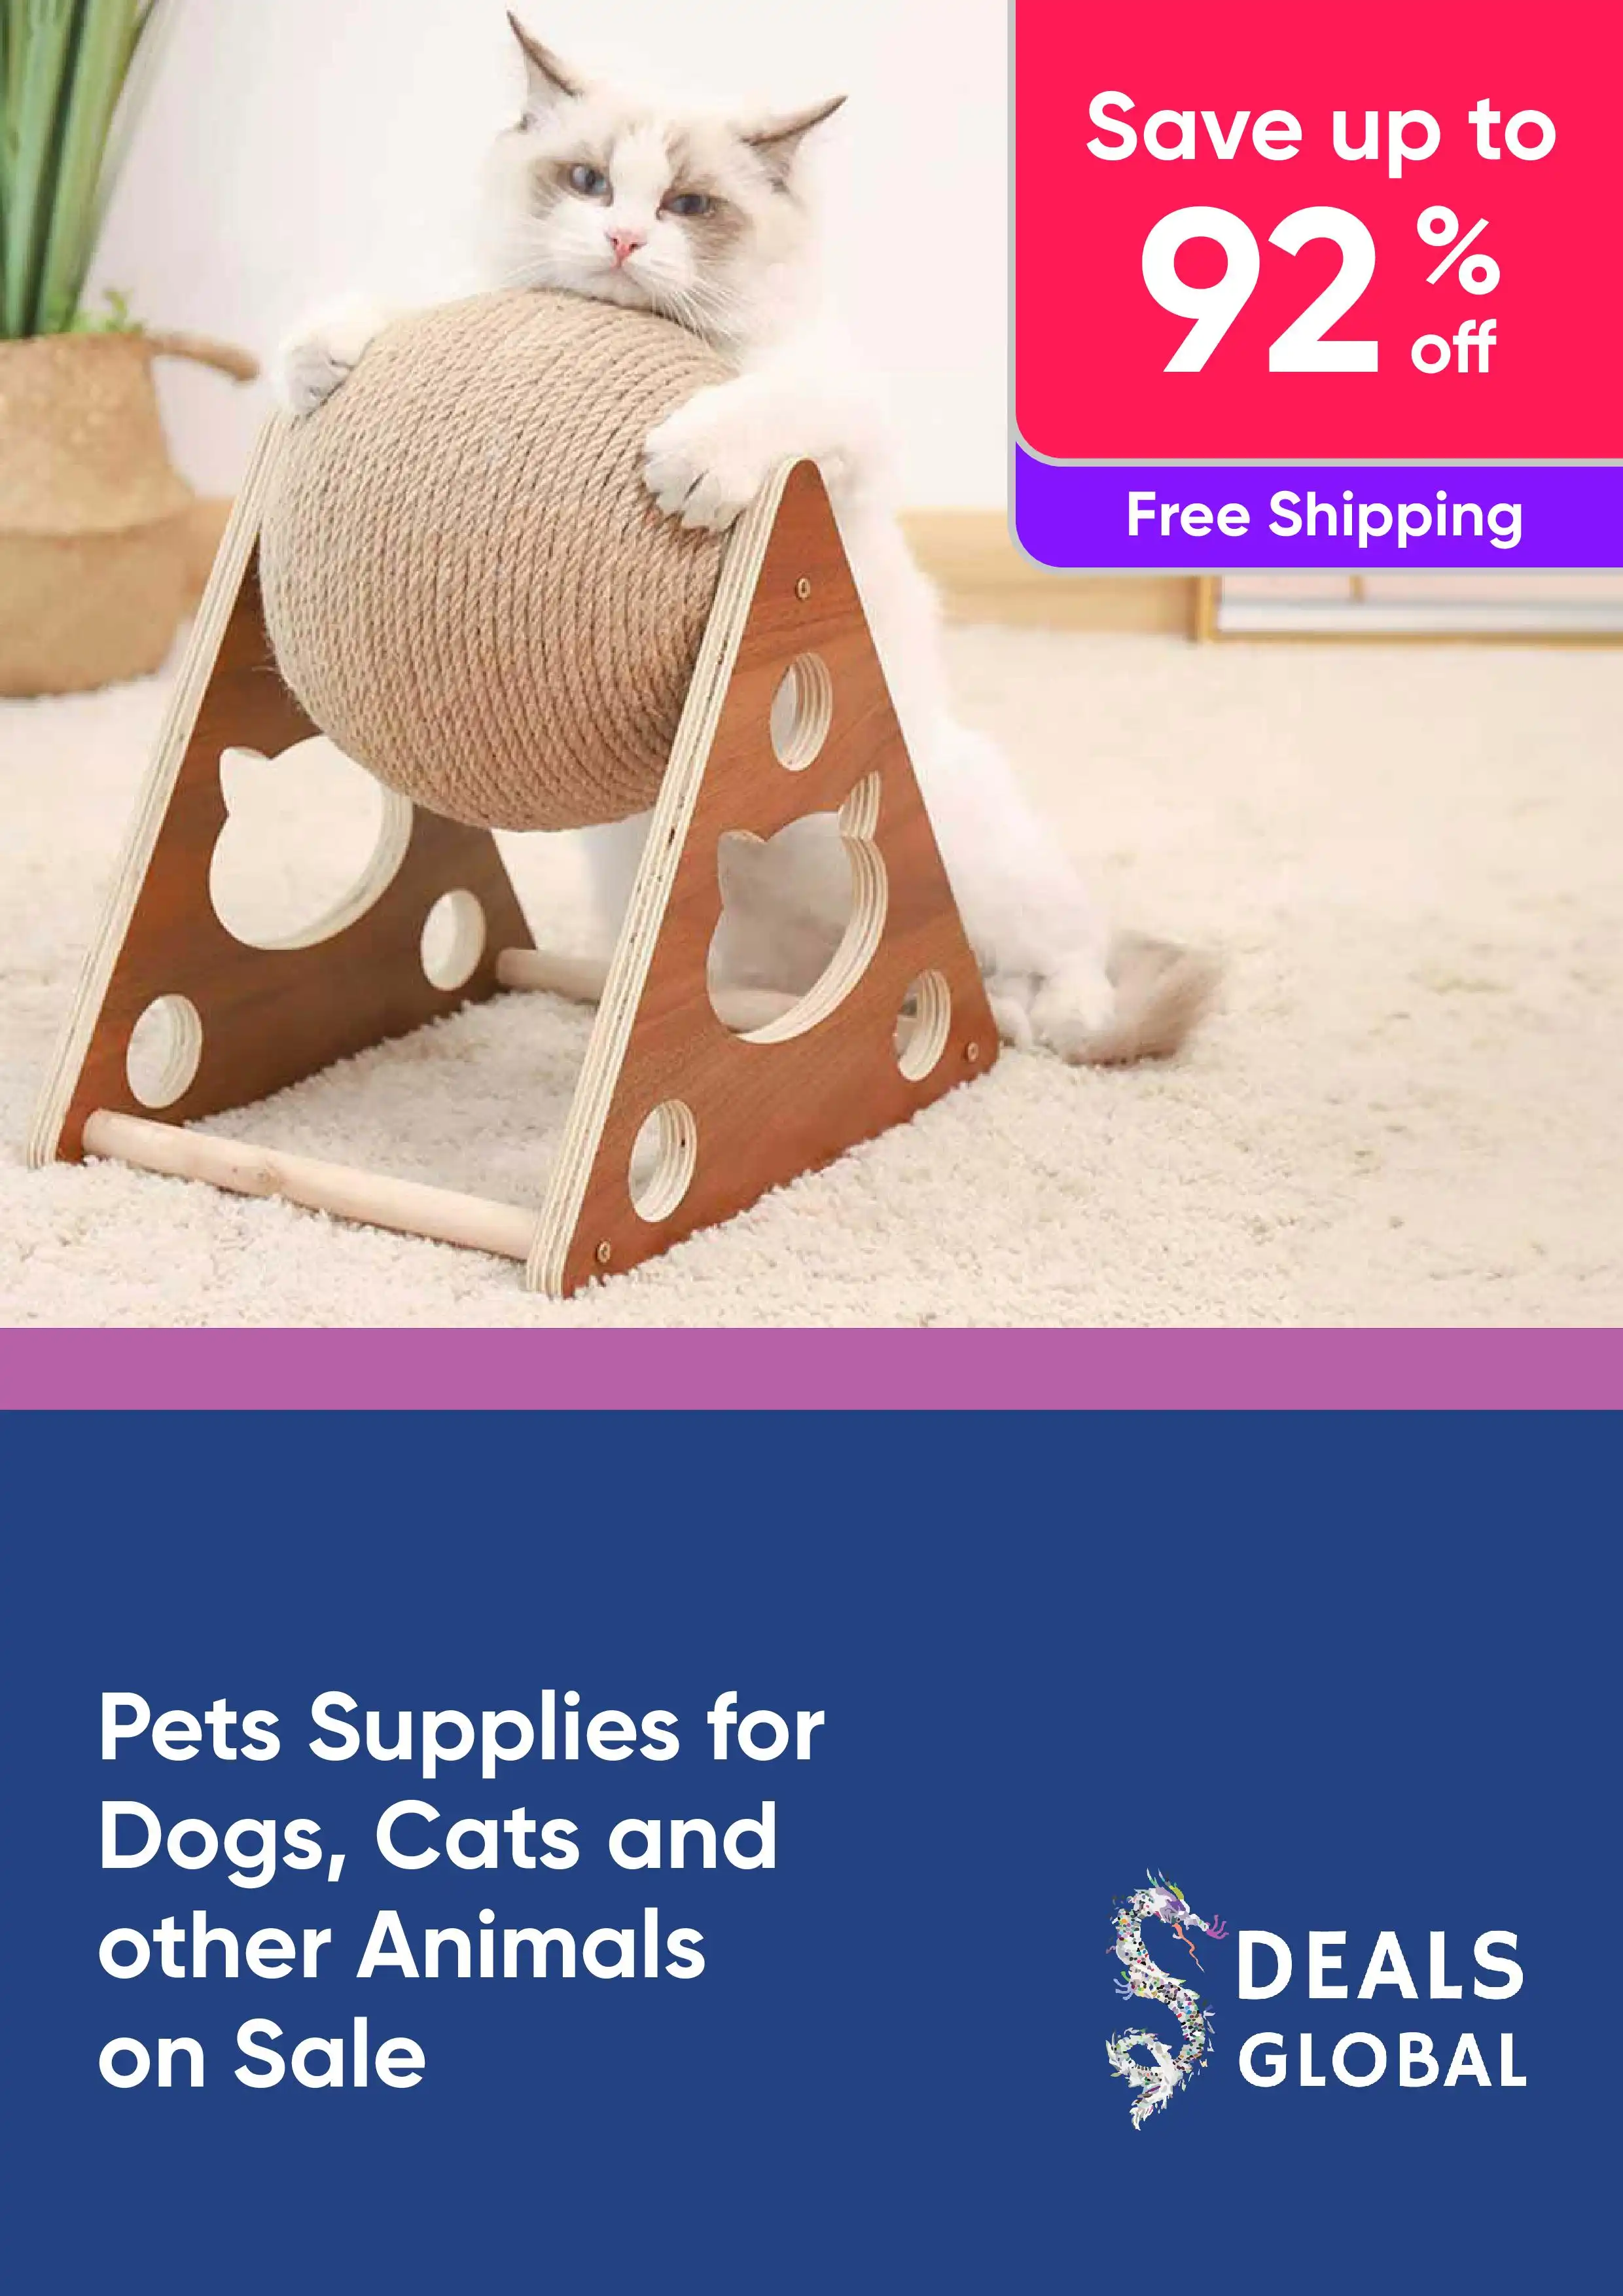 Save Up to 92% Off A Large Range of Pets Supplies for Dogs, Cats and other Animals